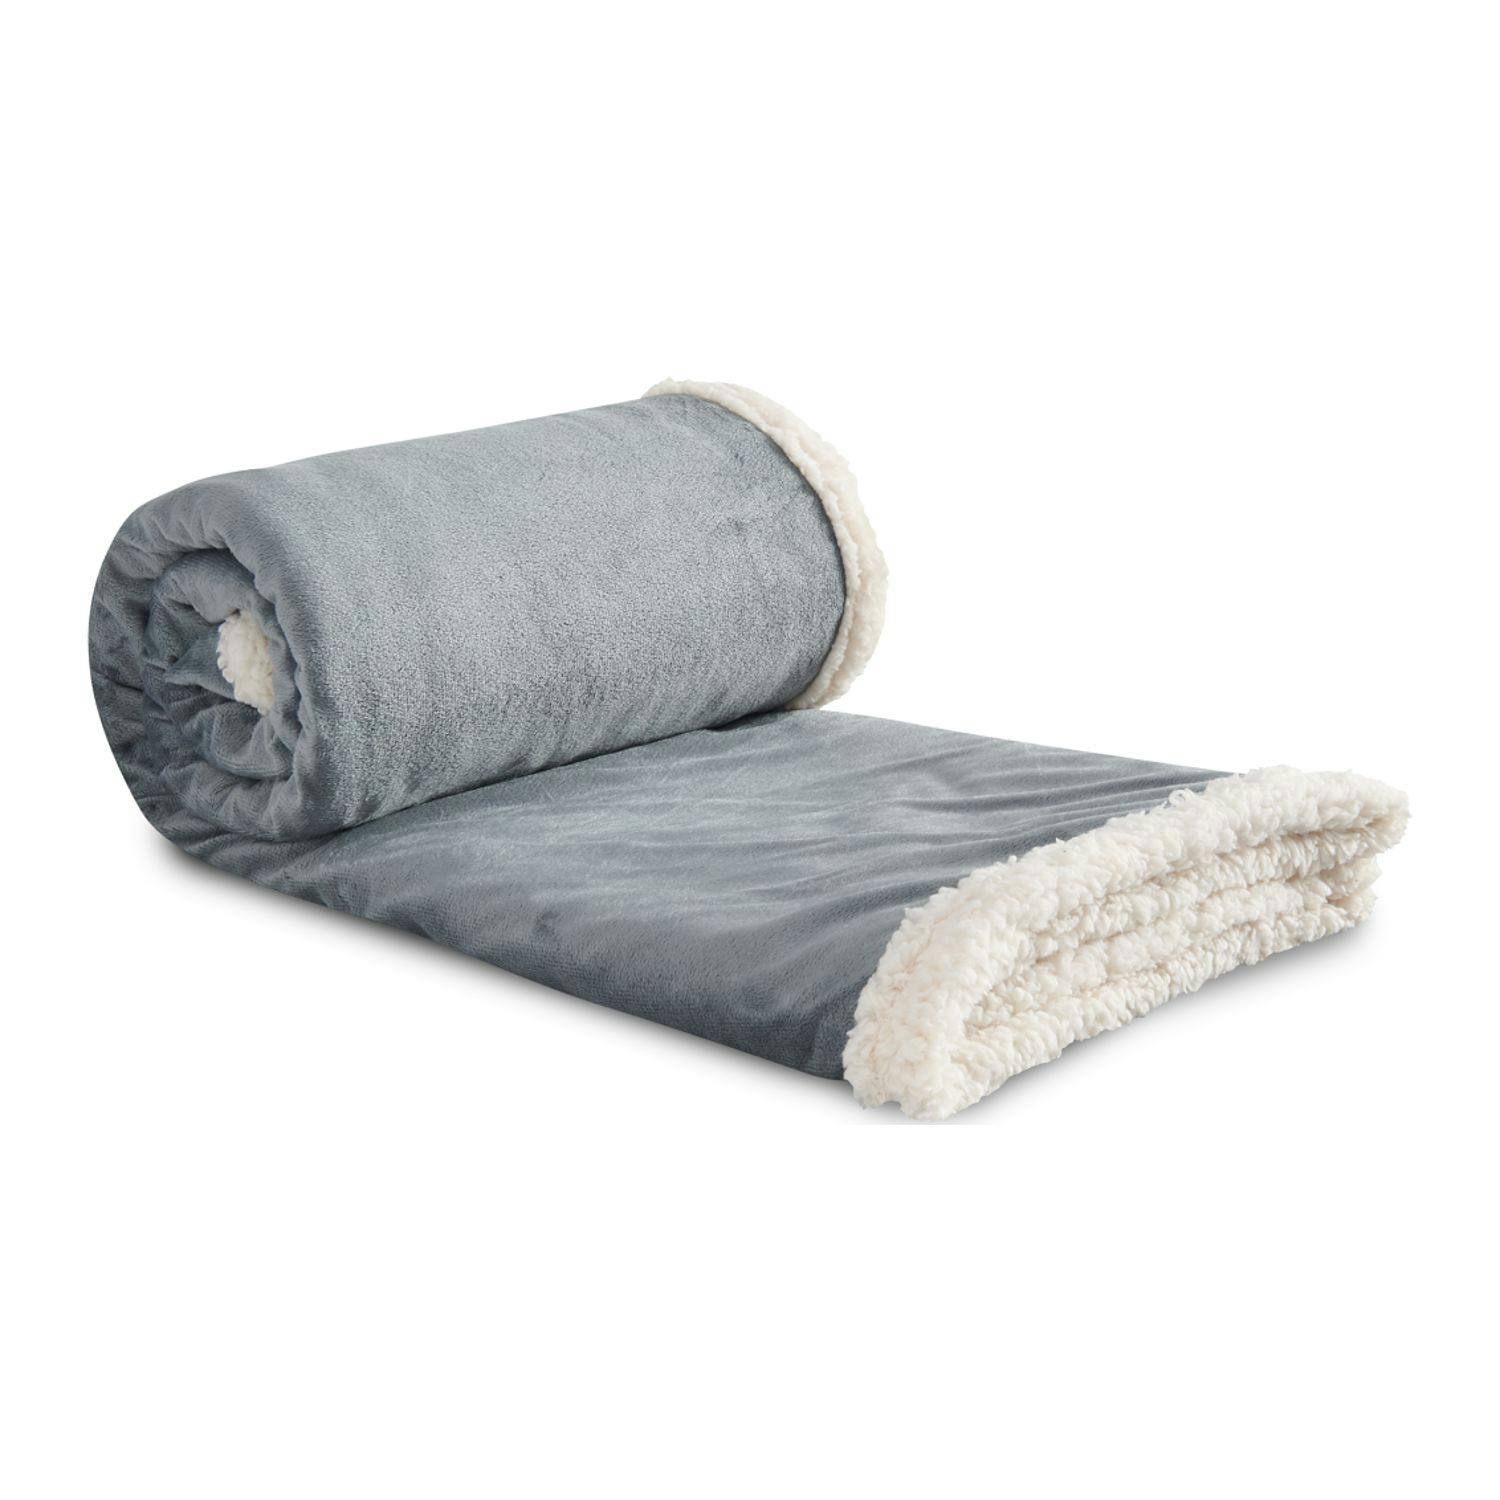 Field & Co.® Sherpa Blanket - additional Image 2